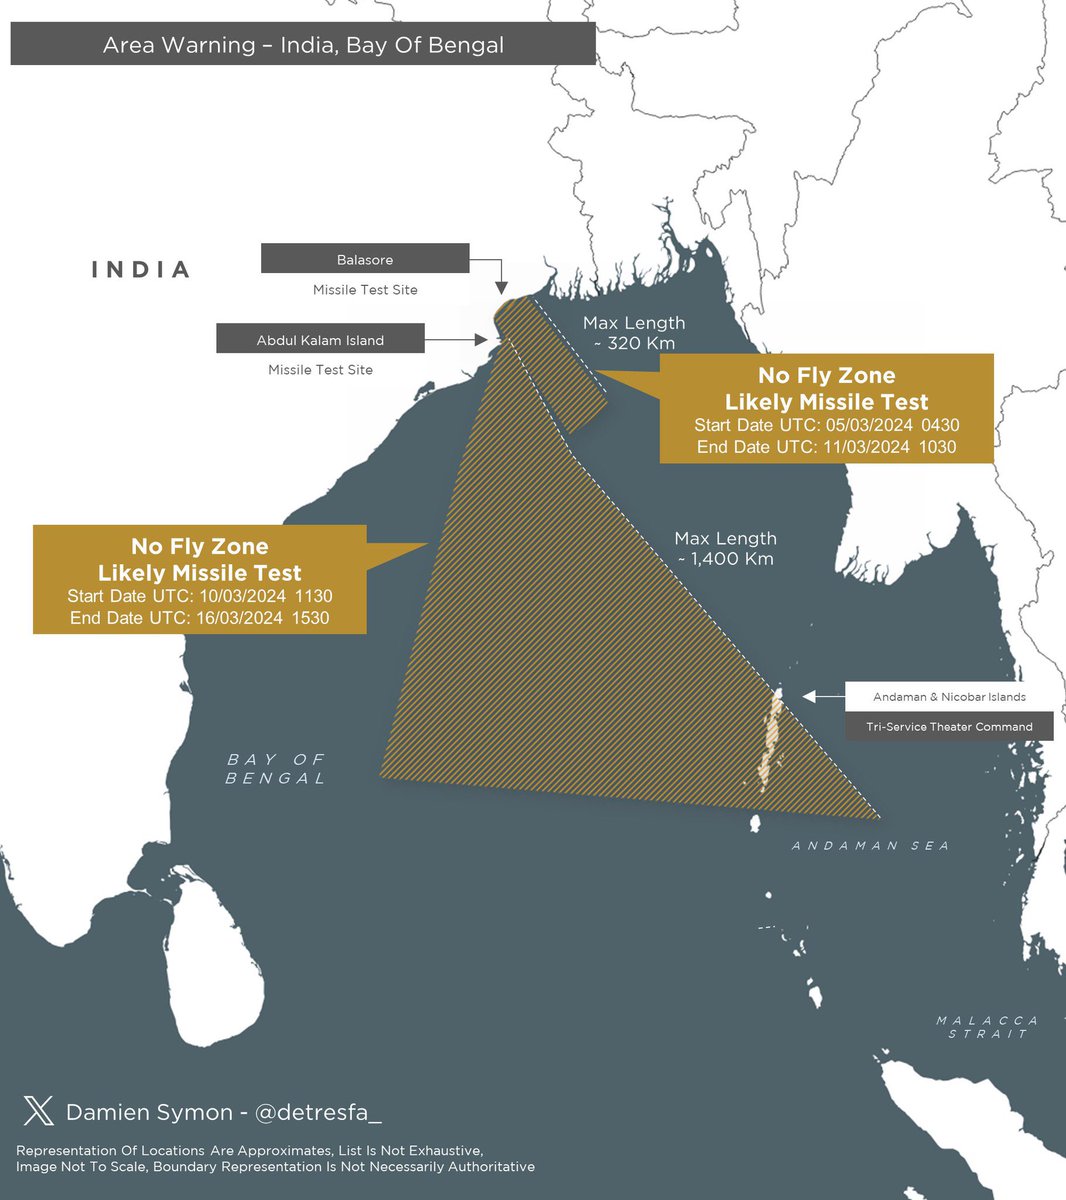 #AreaWarning #India issues notifications for no fly zones over the Bay Of Bengal indicative of likely missile tests Dates | 05-11, 10-16 March 2024

Which toy is being tested?